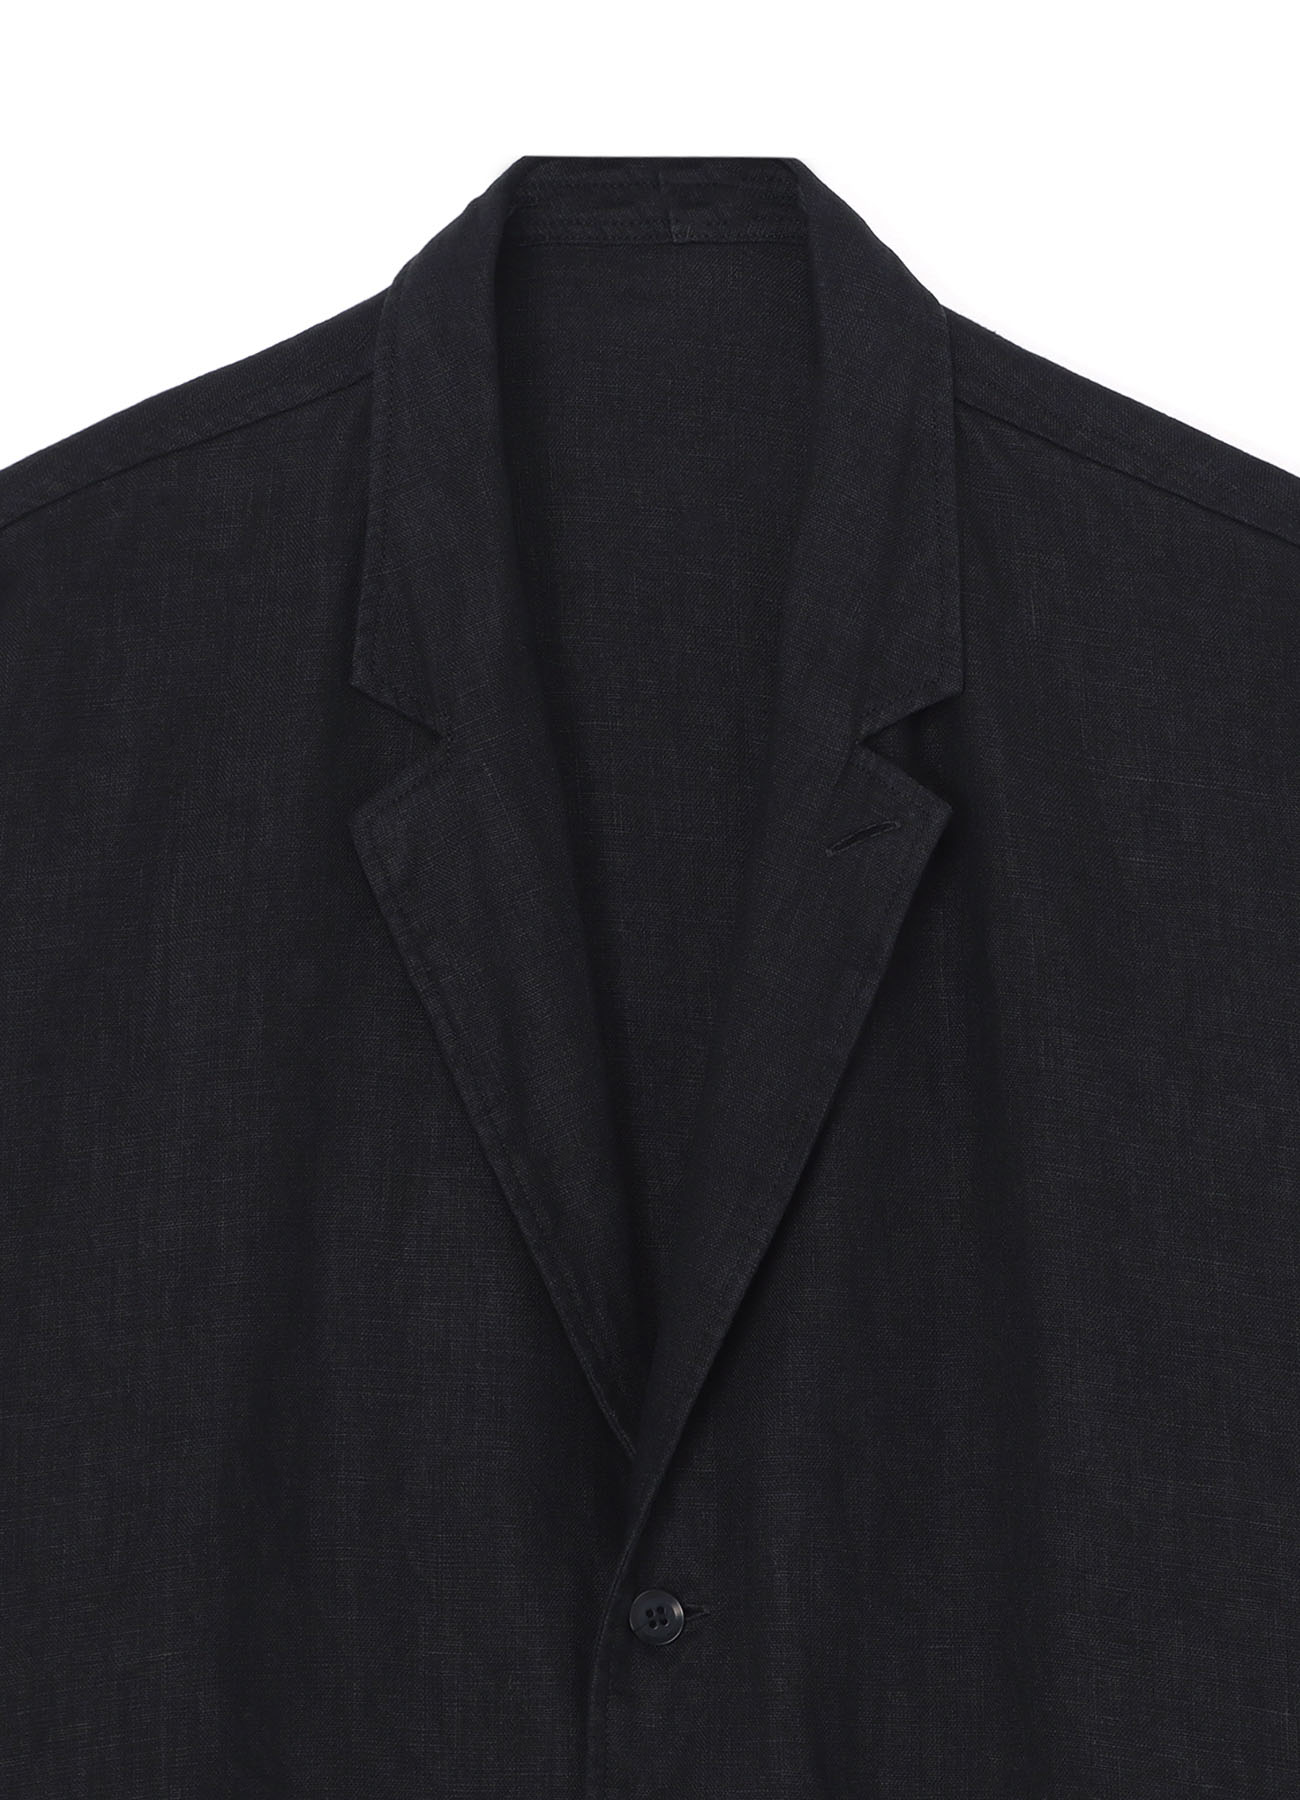 SHIRT WITH NOTCHED LAPELS